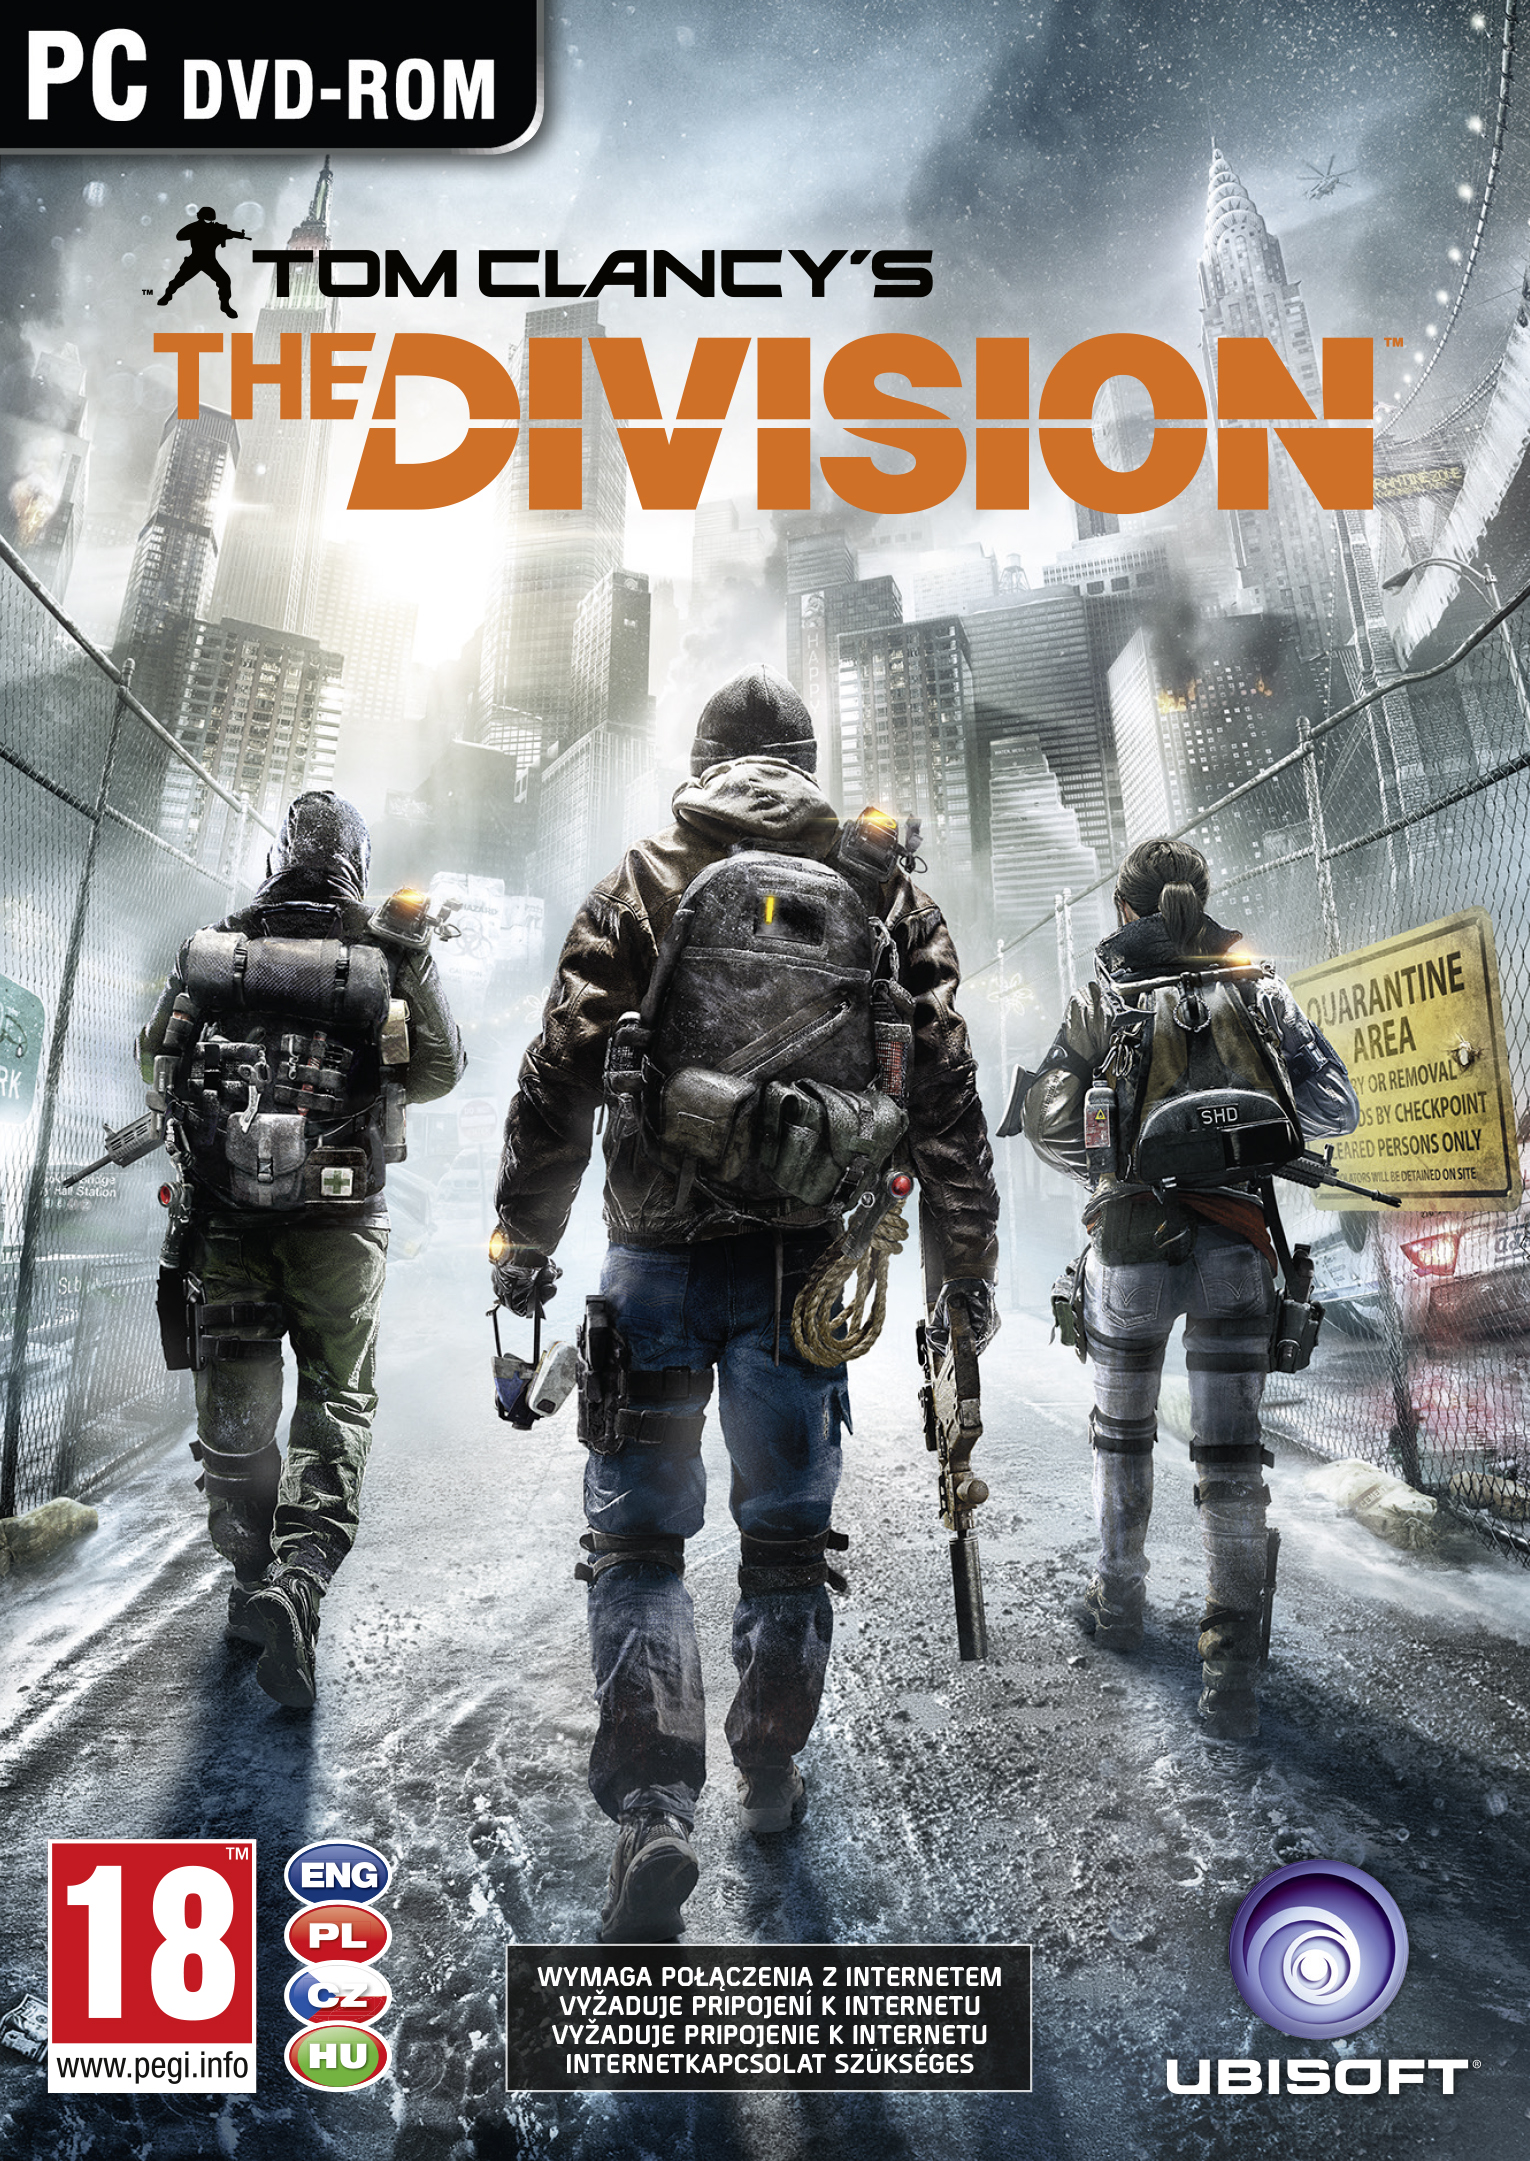 Tom Clancy's The Division: Marine Forces Outfits Pack (PC) PL DIGITAL